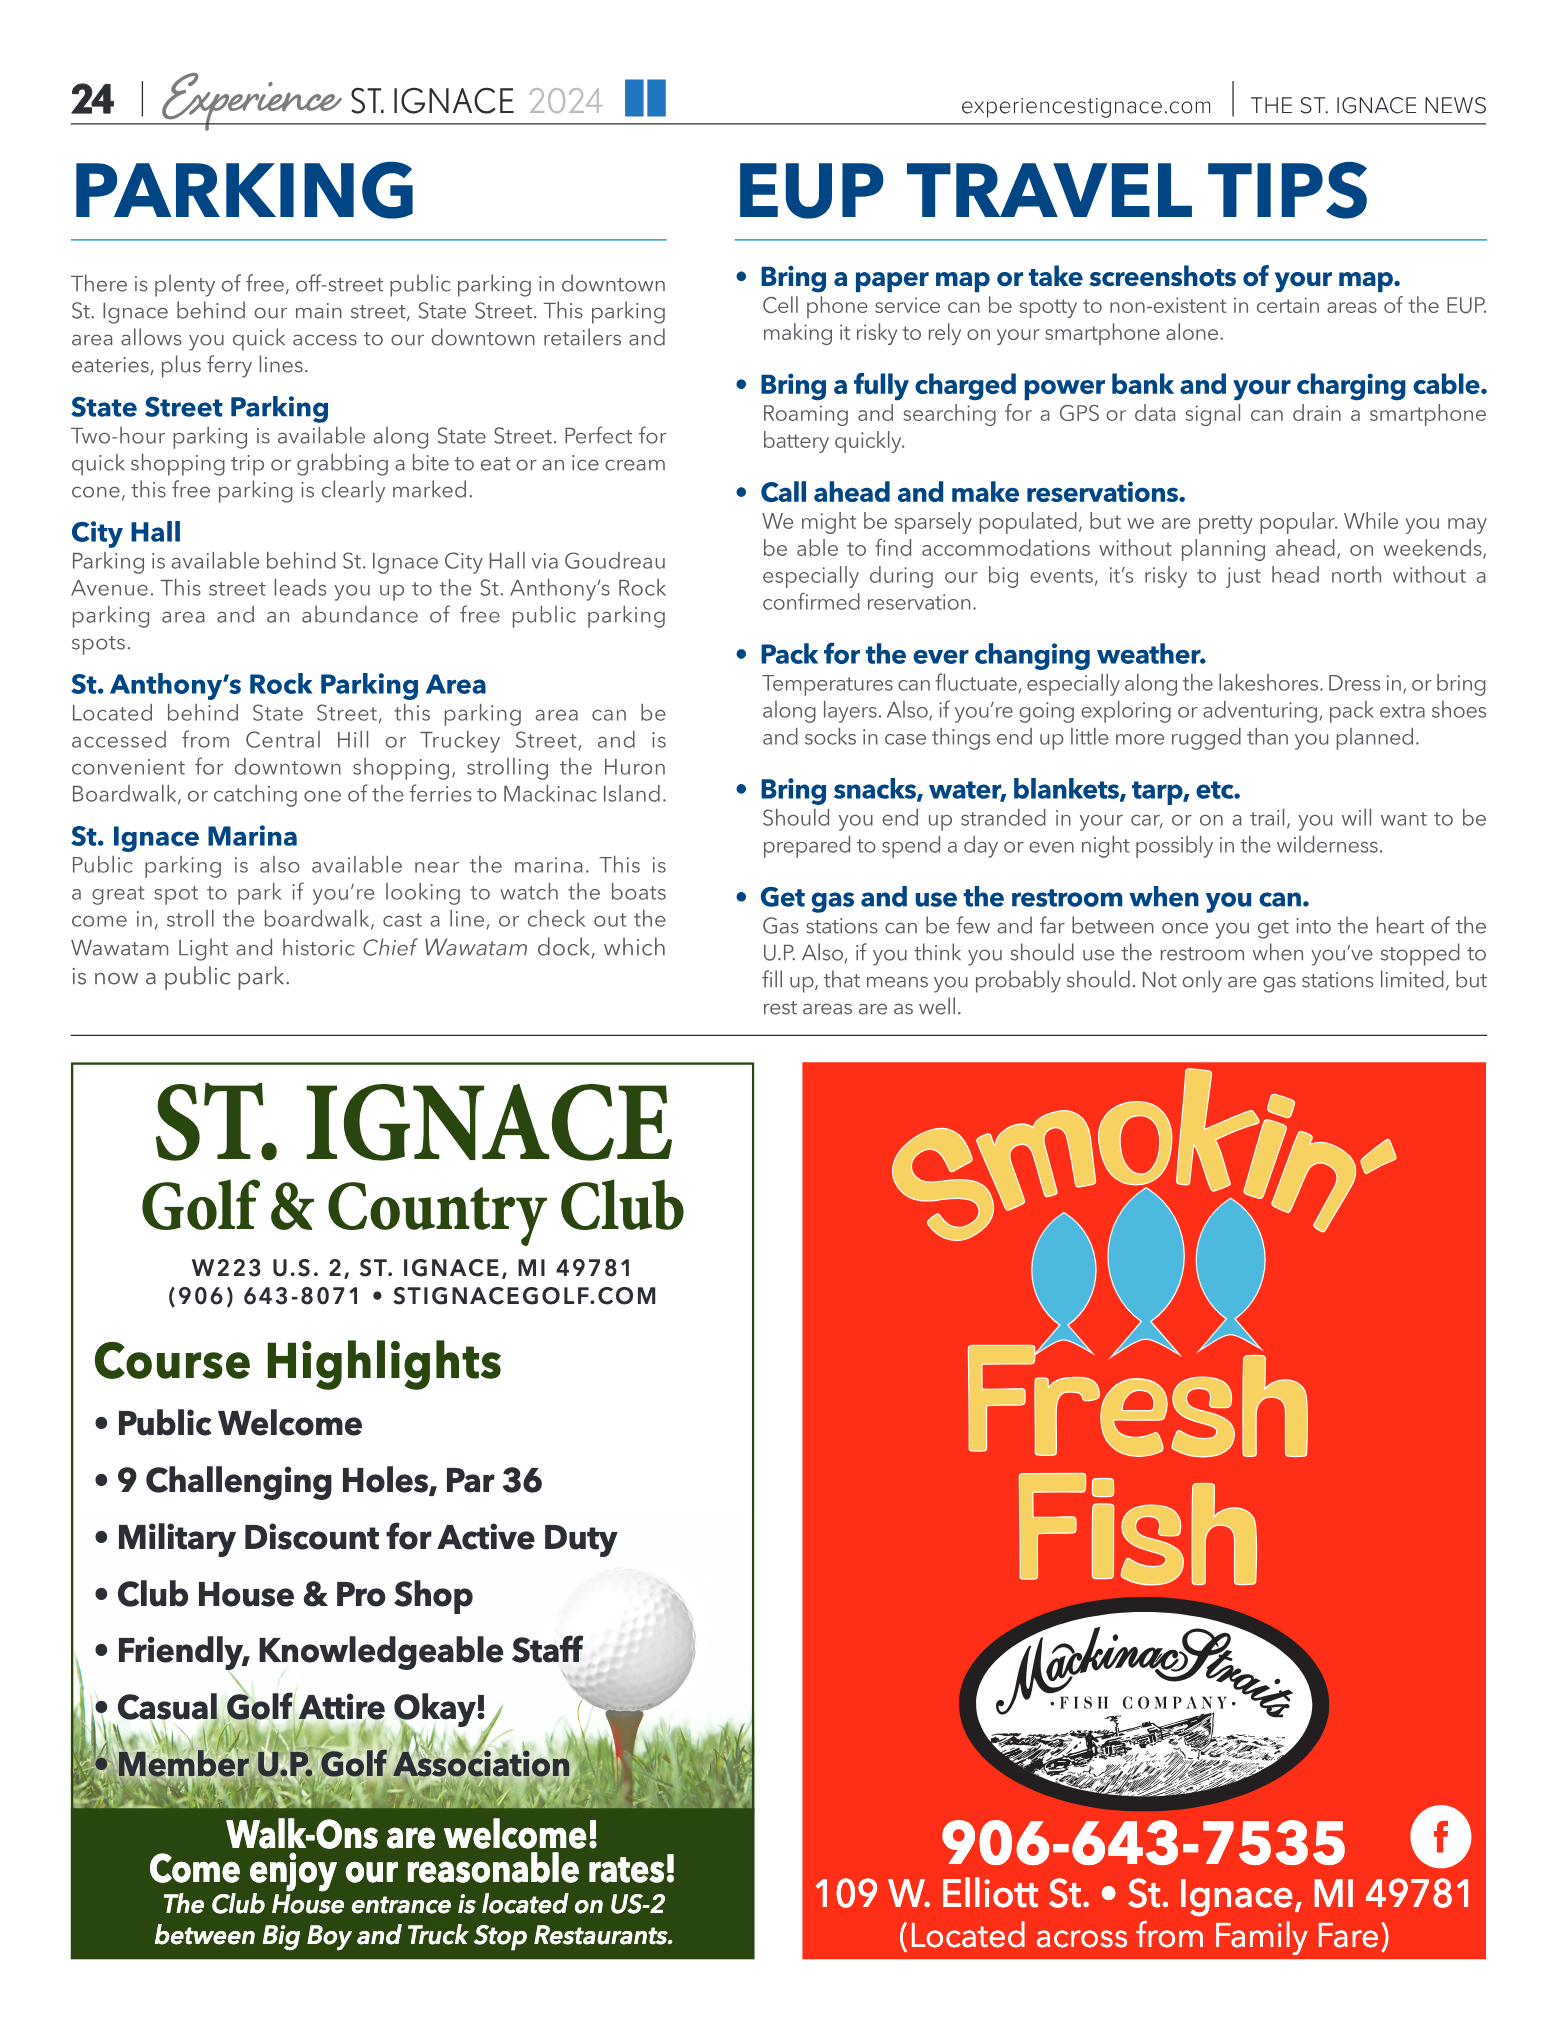 Experience St. Ignace - Guest Travel Guide 2024 - page 24